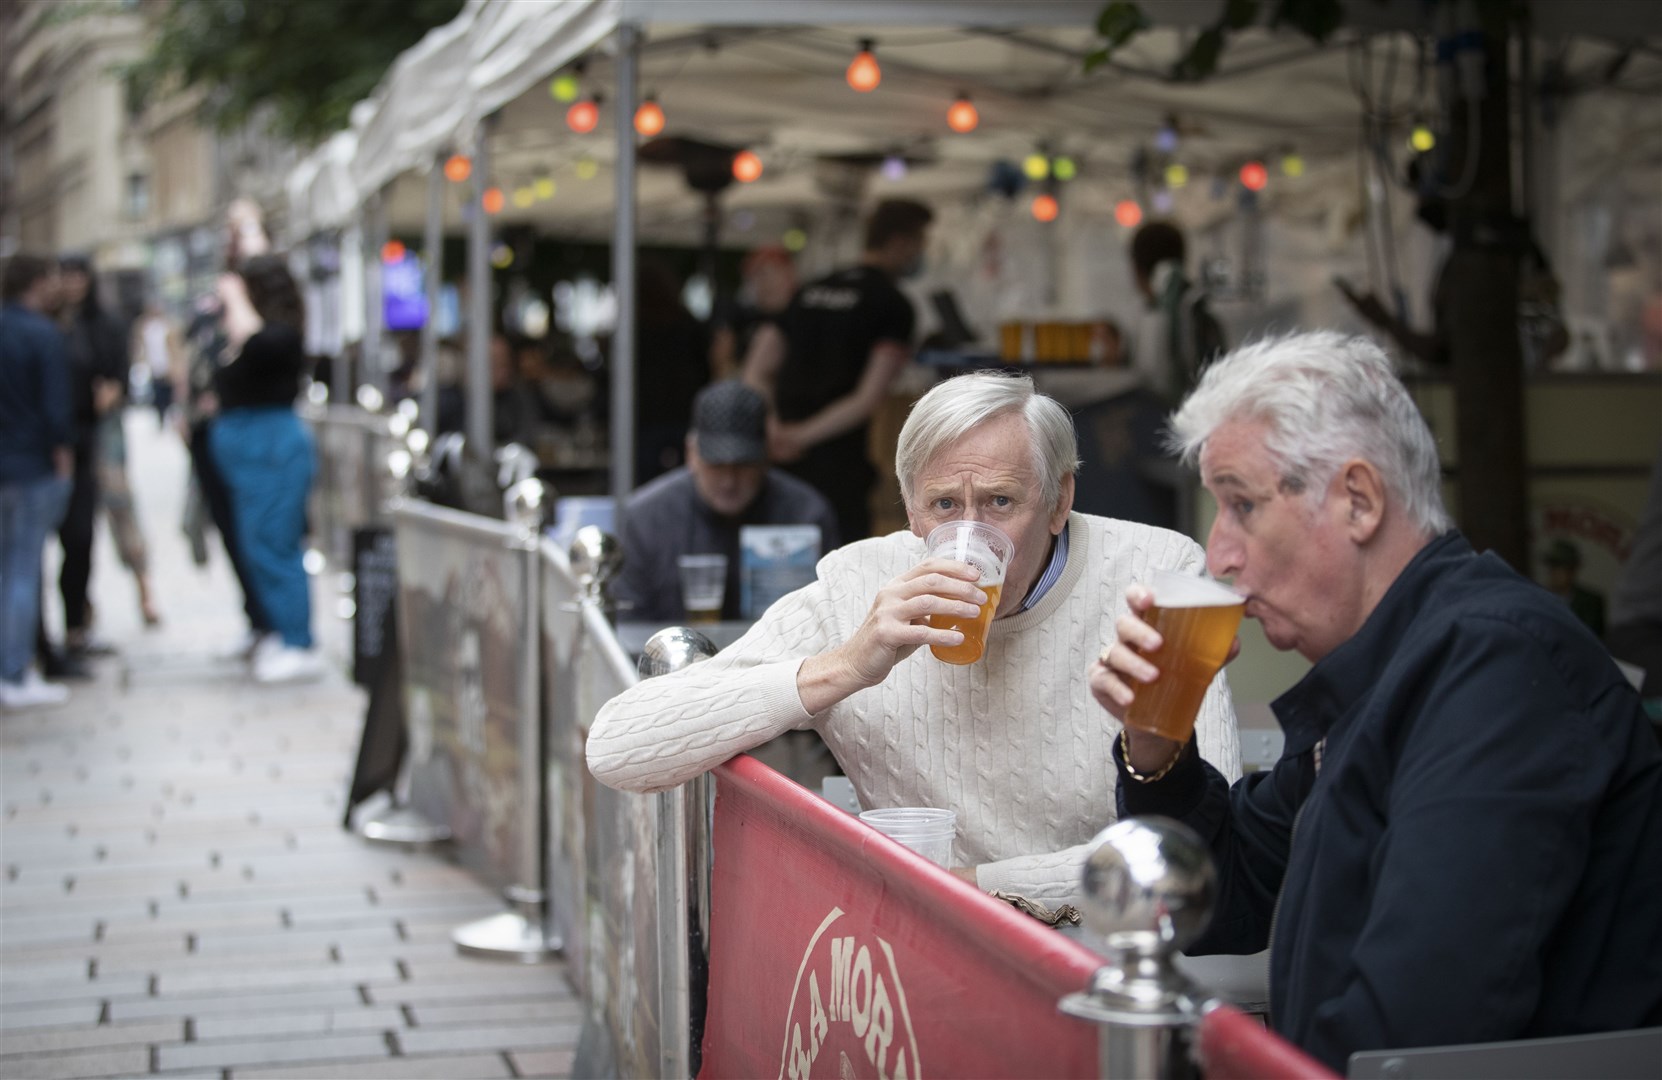 Beer gardens and outdoor venues in England could open with restrictions from April 12, according to the Government’s ‘road map’ out of lockdown (Jane Barlow/PA)